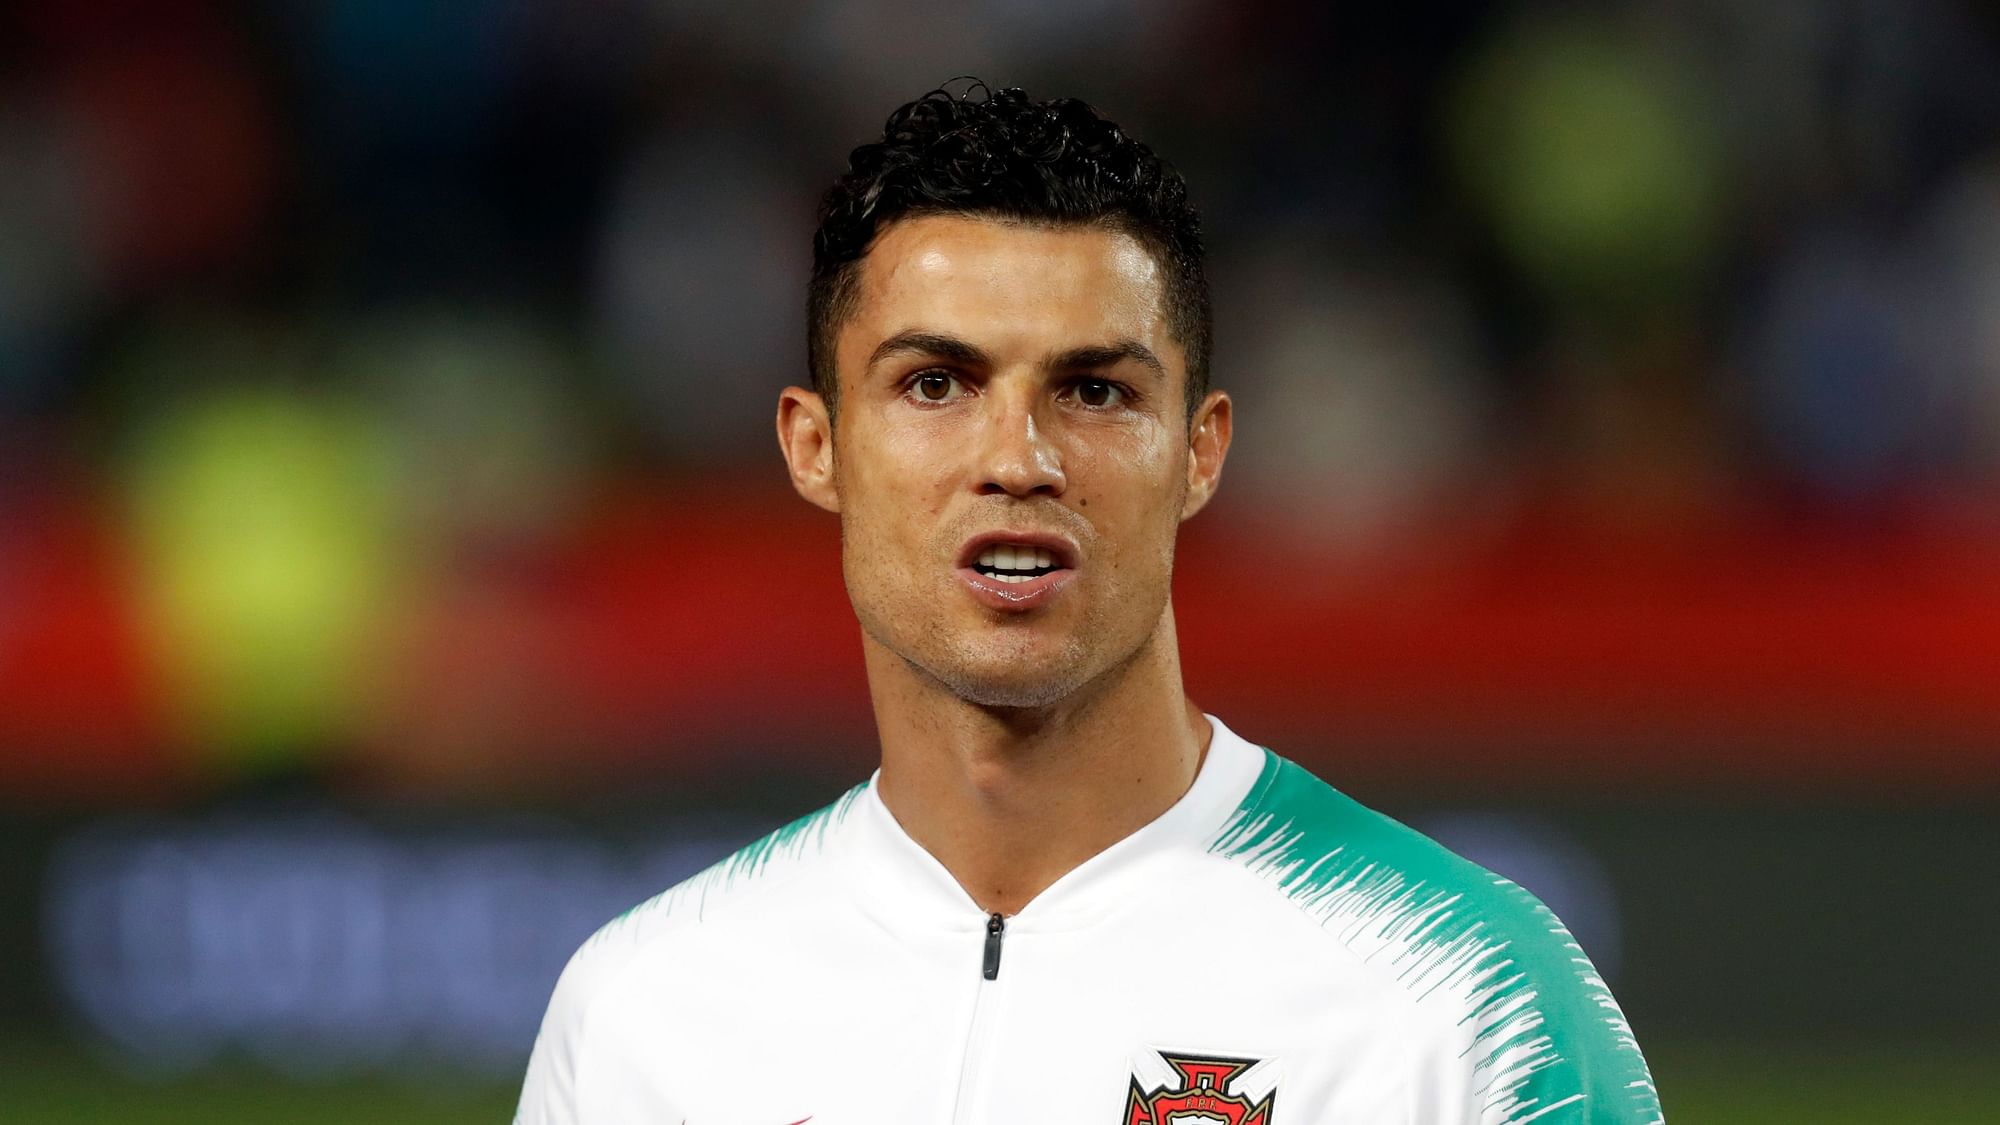 Cristiano Ronaldo’s lawyers have successfully blocked a woman accusing him of rape.&nbsp;